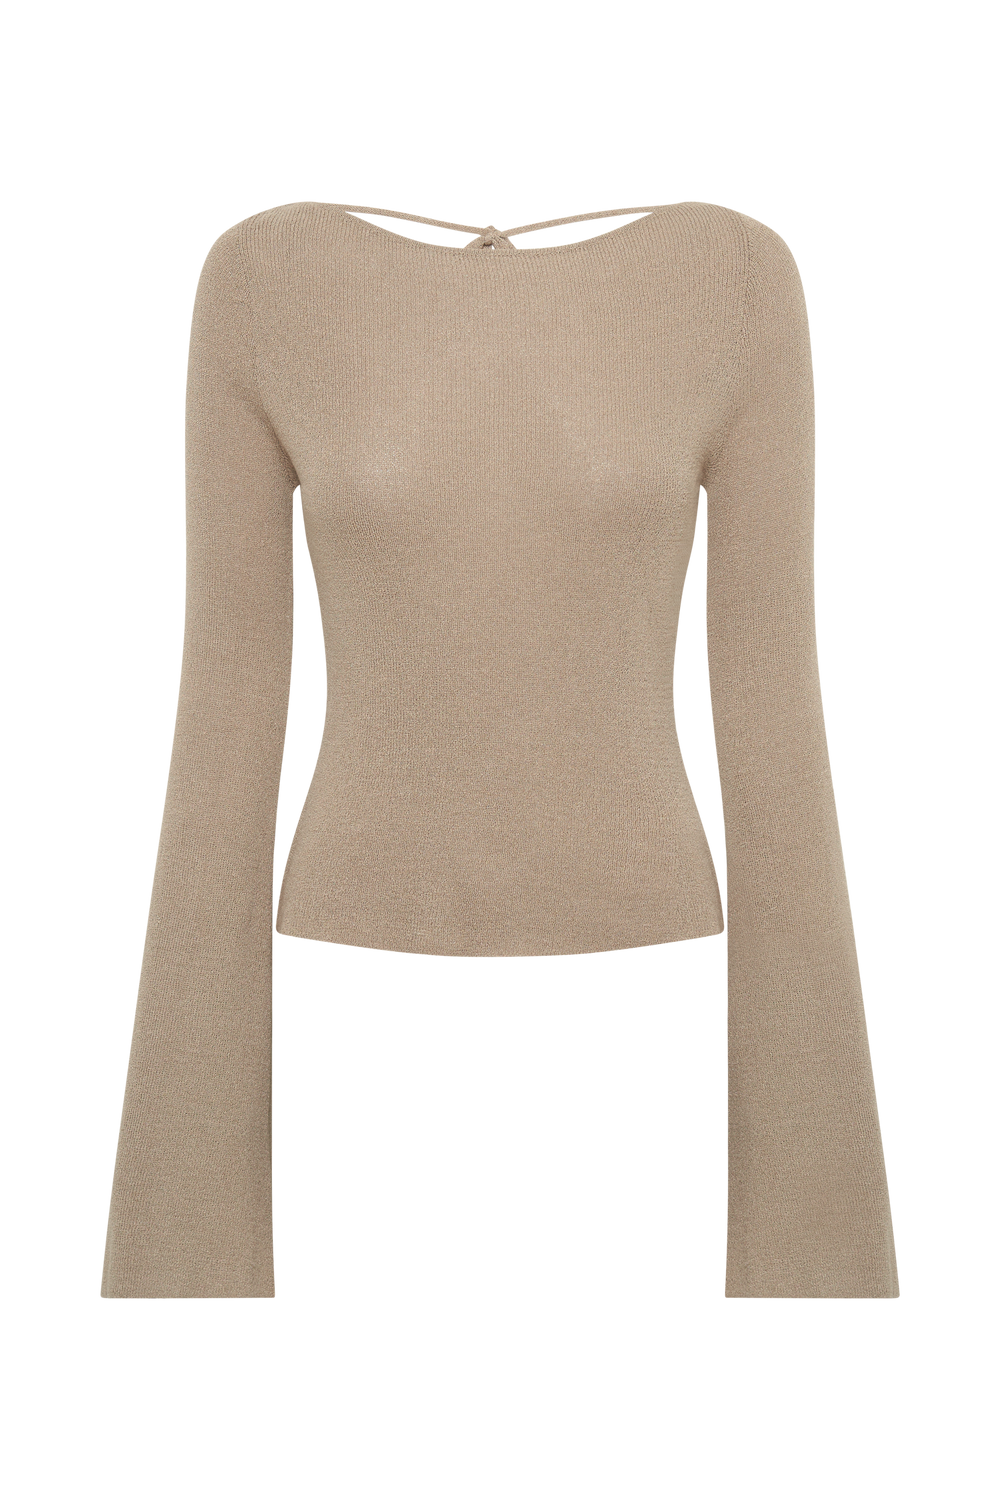 Zahra Backless Knit Top - Taupe